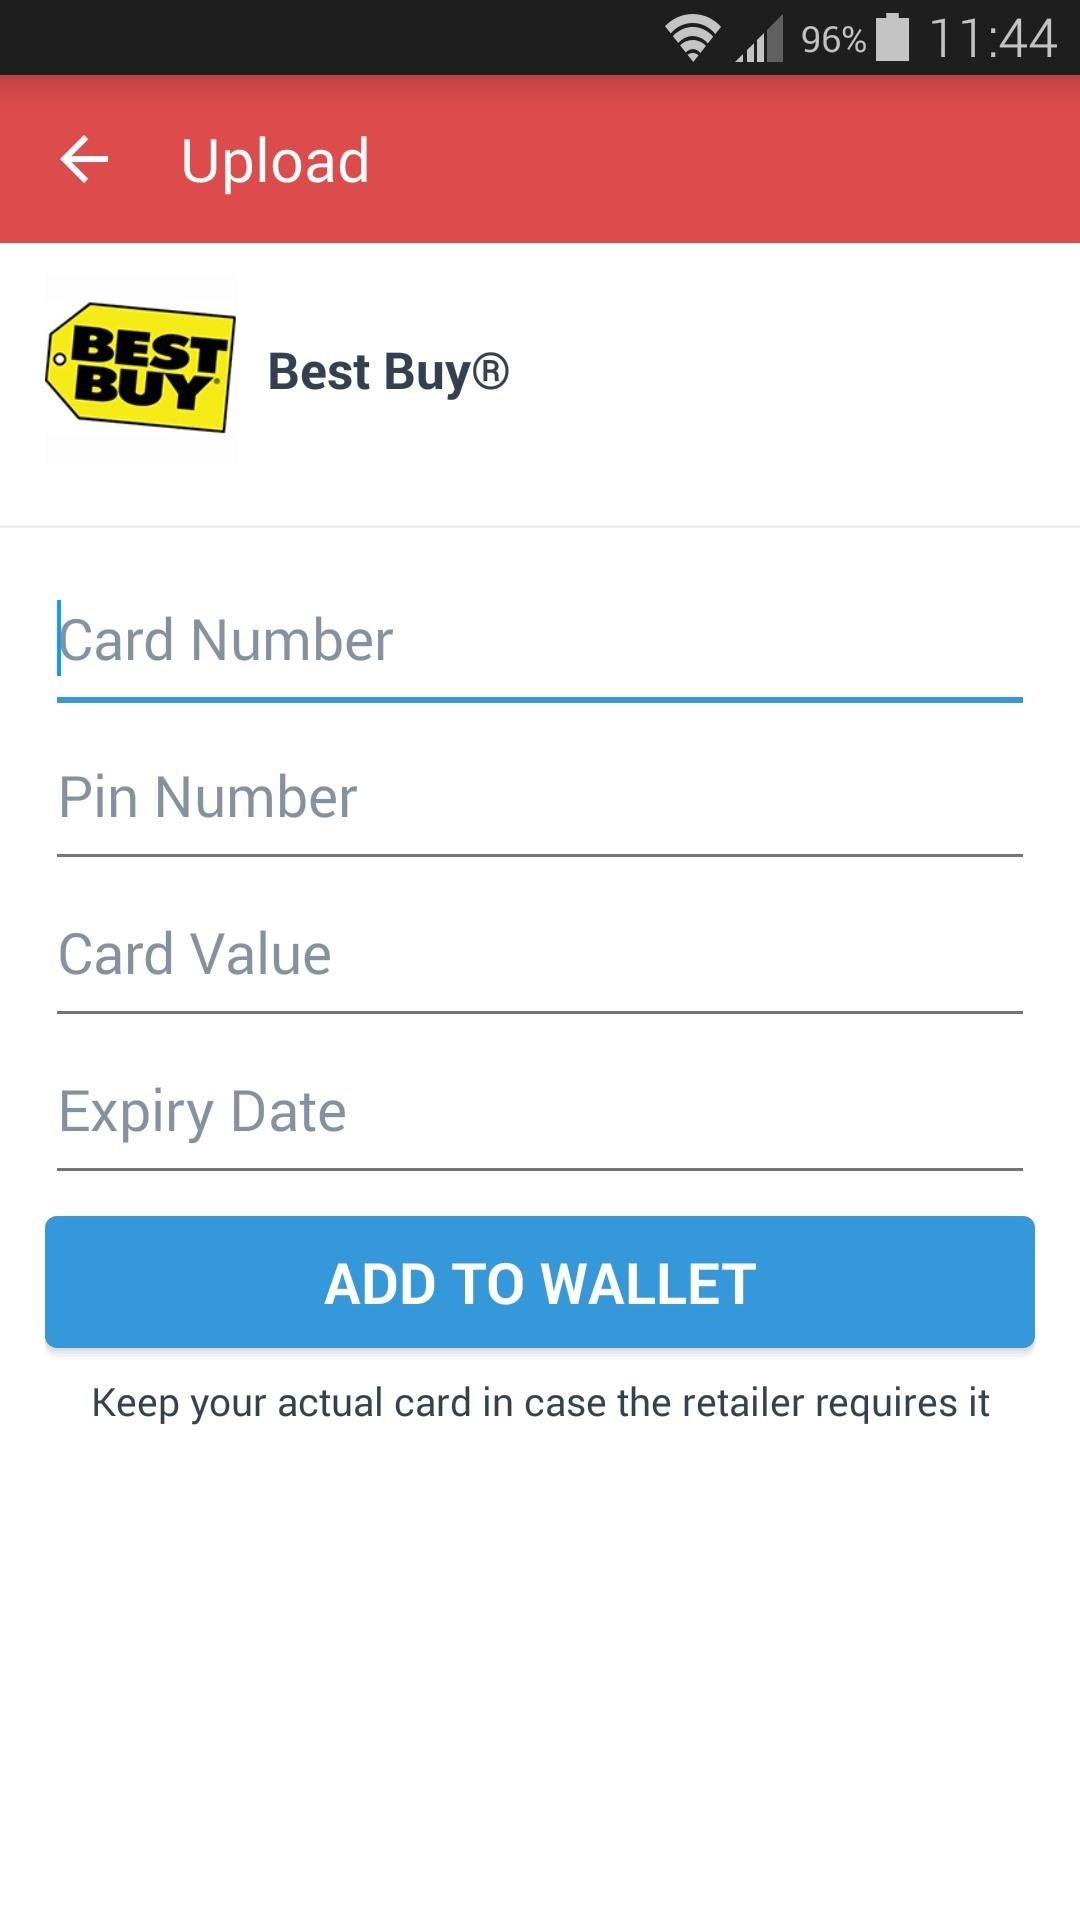 Upload, Buy, Send, Receive, & Redeem Almost Any Gift Card on Your Phone